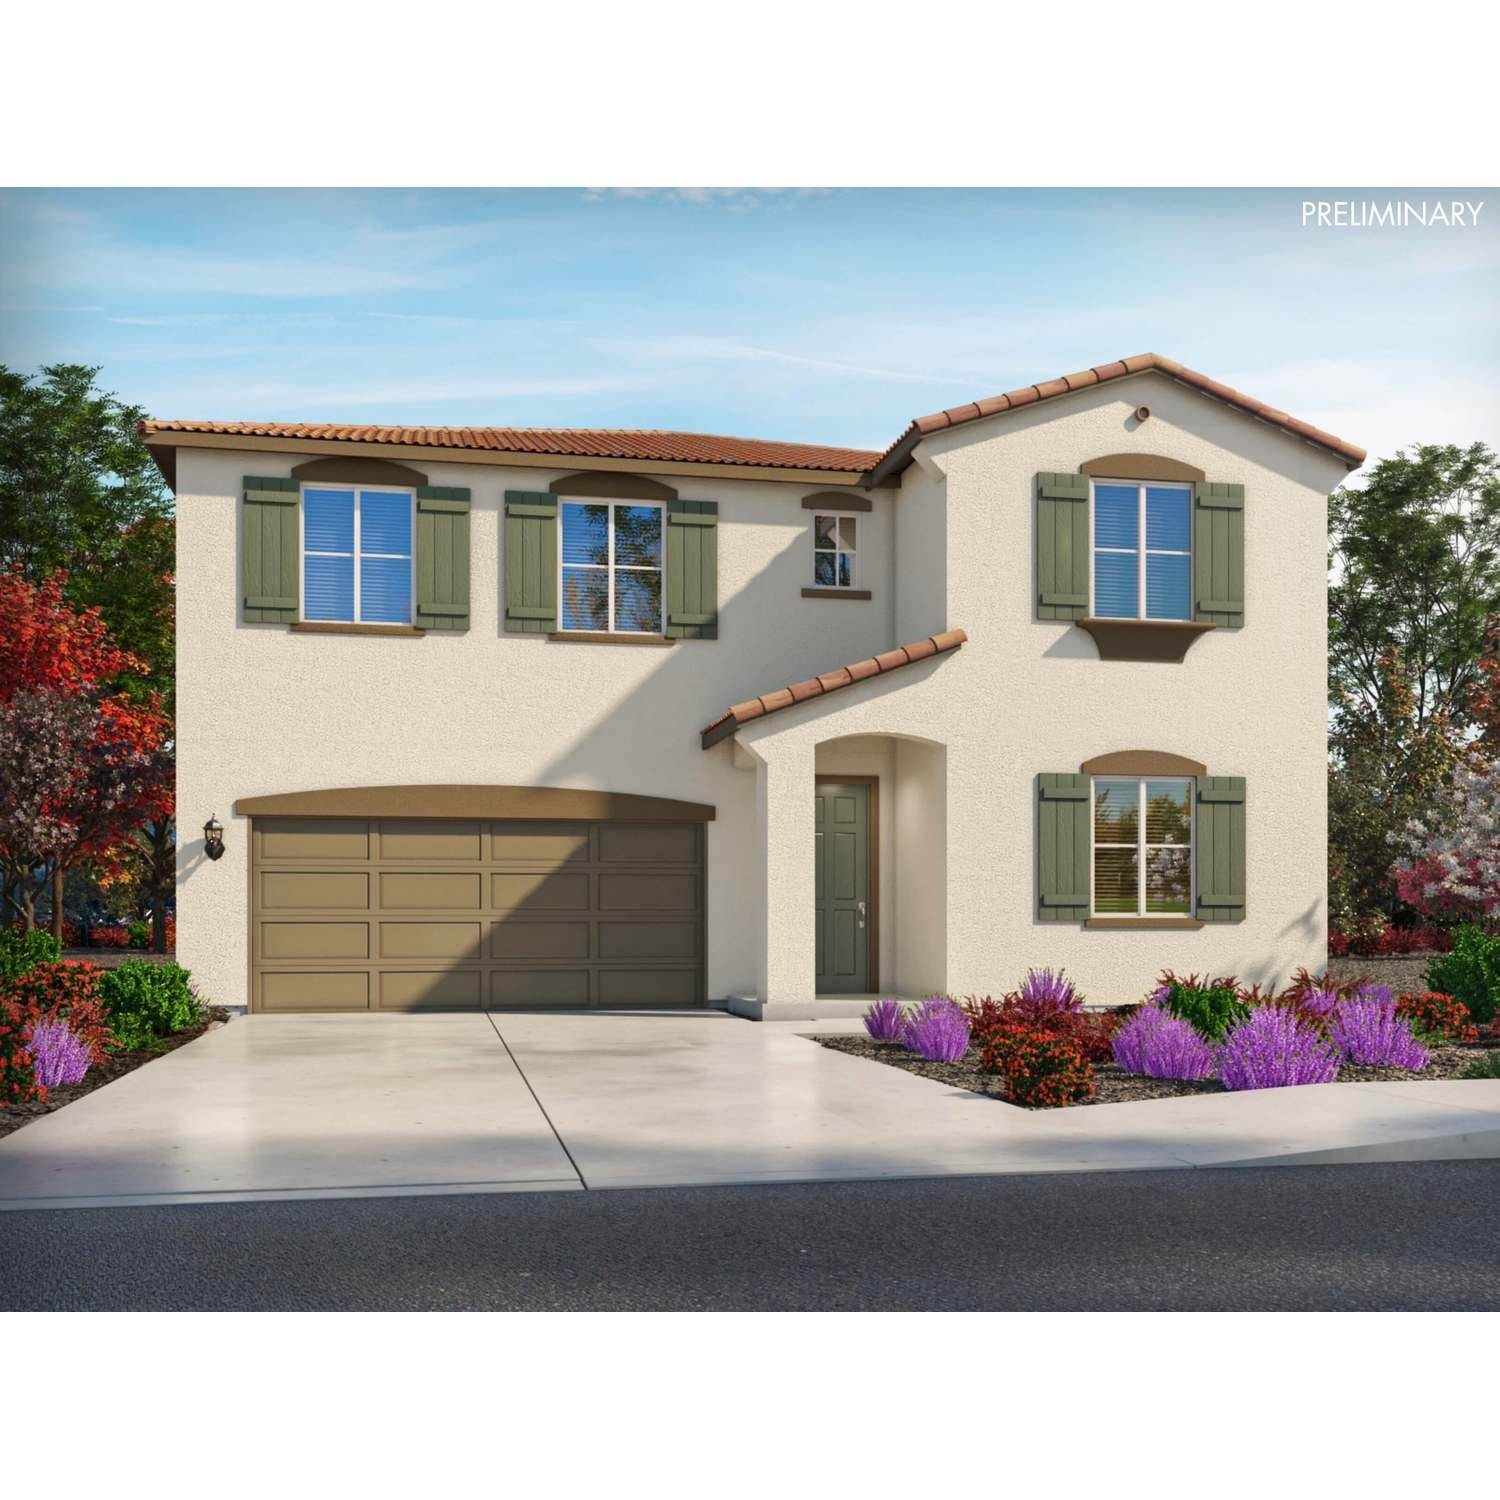 Single Family for Sale at Cornerstone Commons 10198 Pagoda Way, Elk Grove, CA 95757